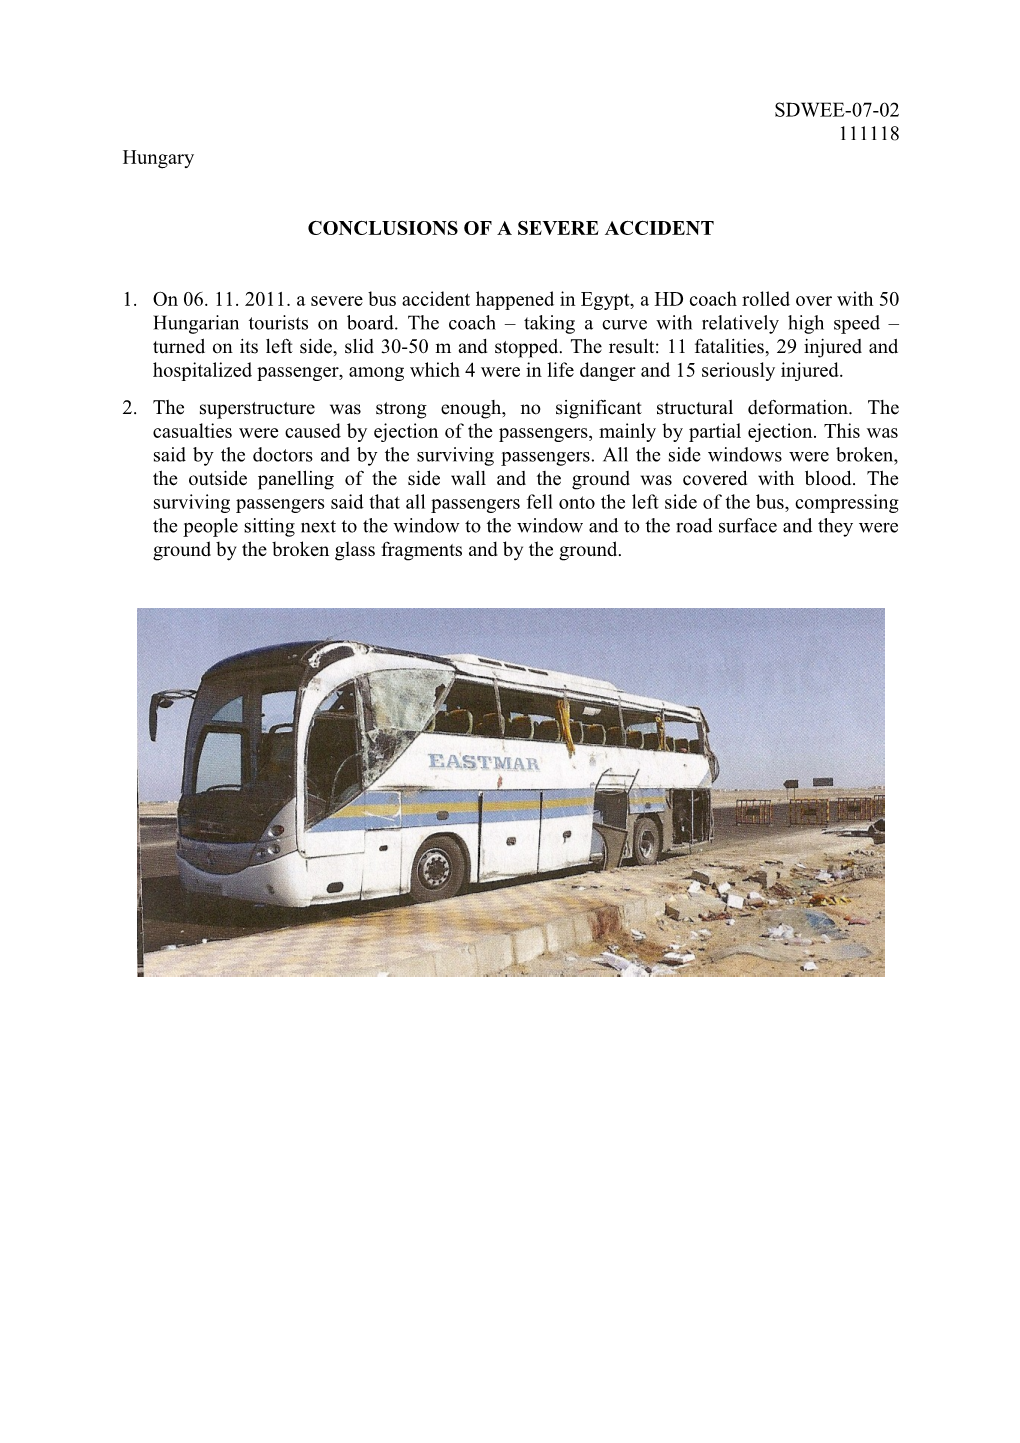 Conclusions of a Severe Accident